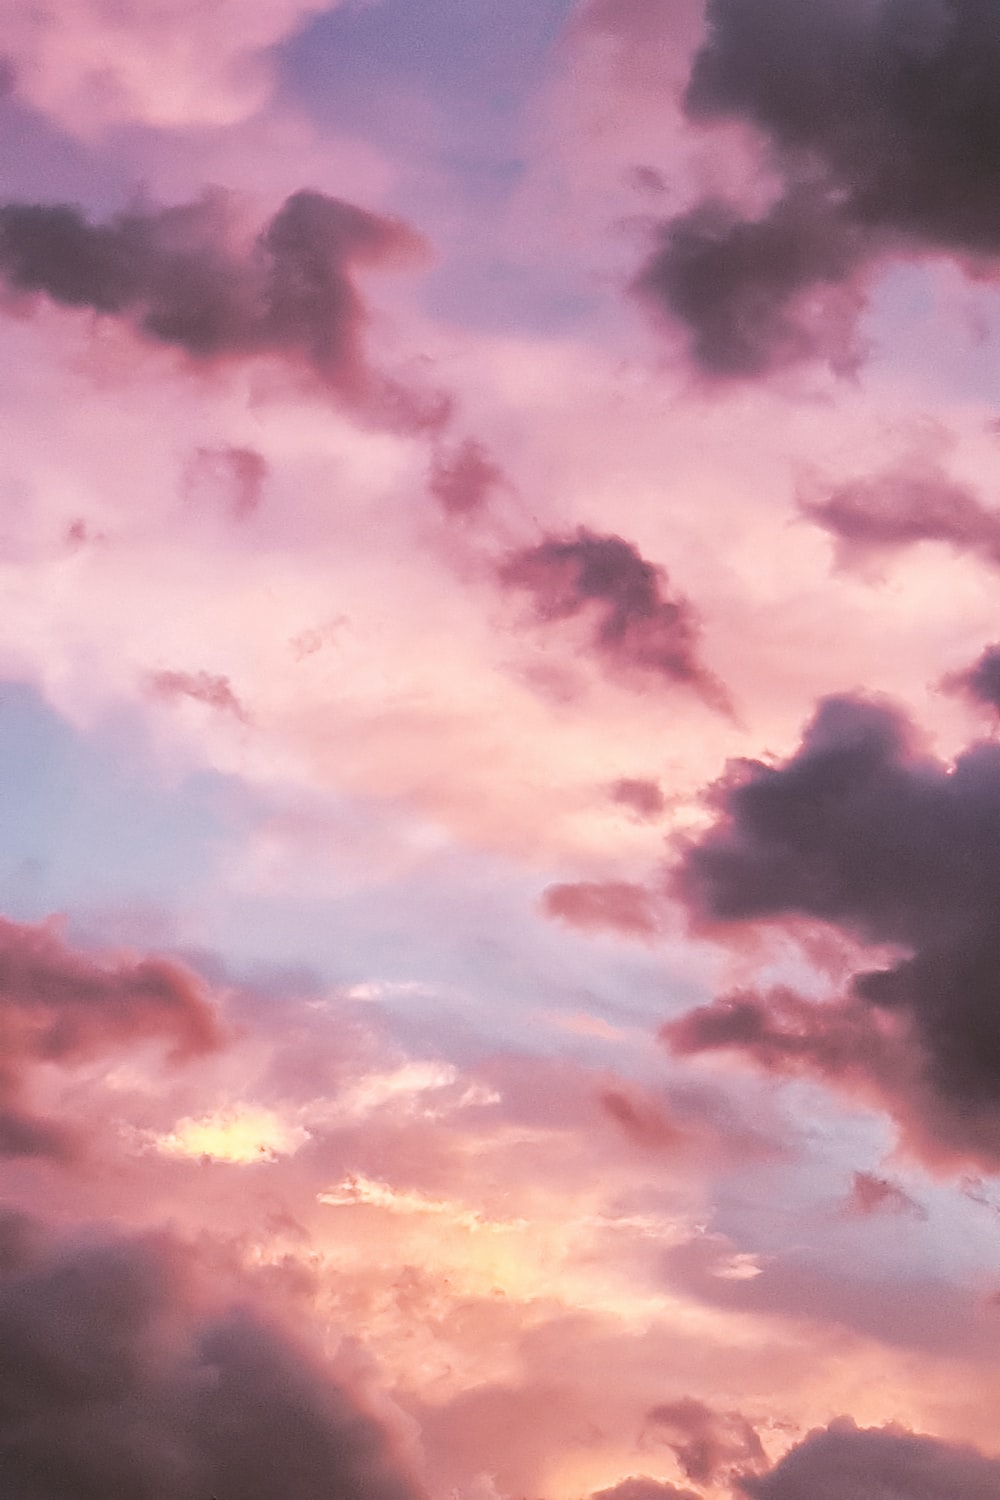 Stunning Pink Sunset Picture. Download Free Image